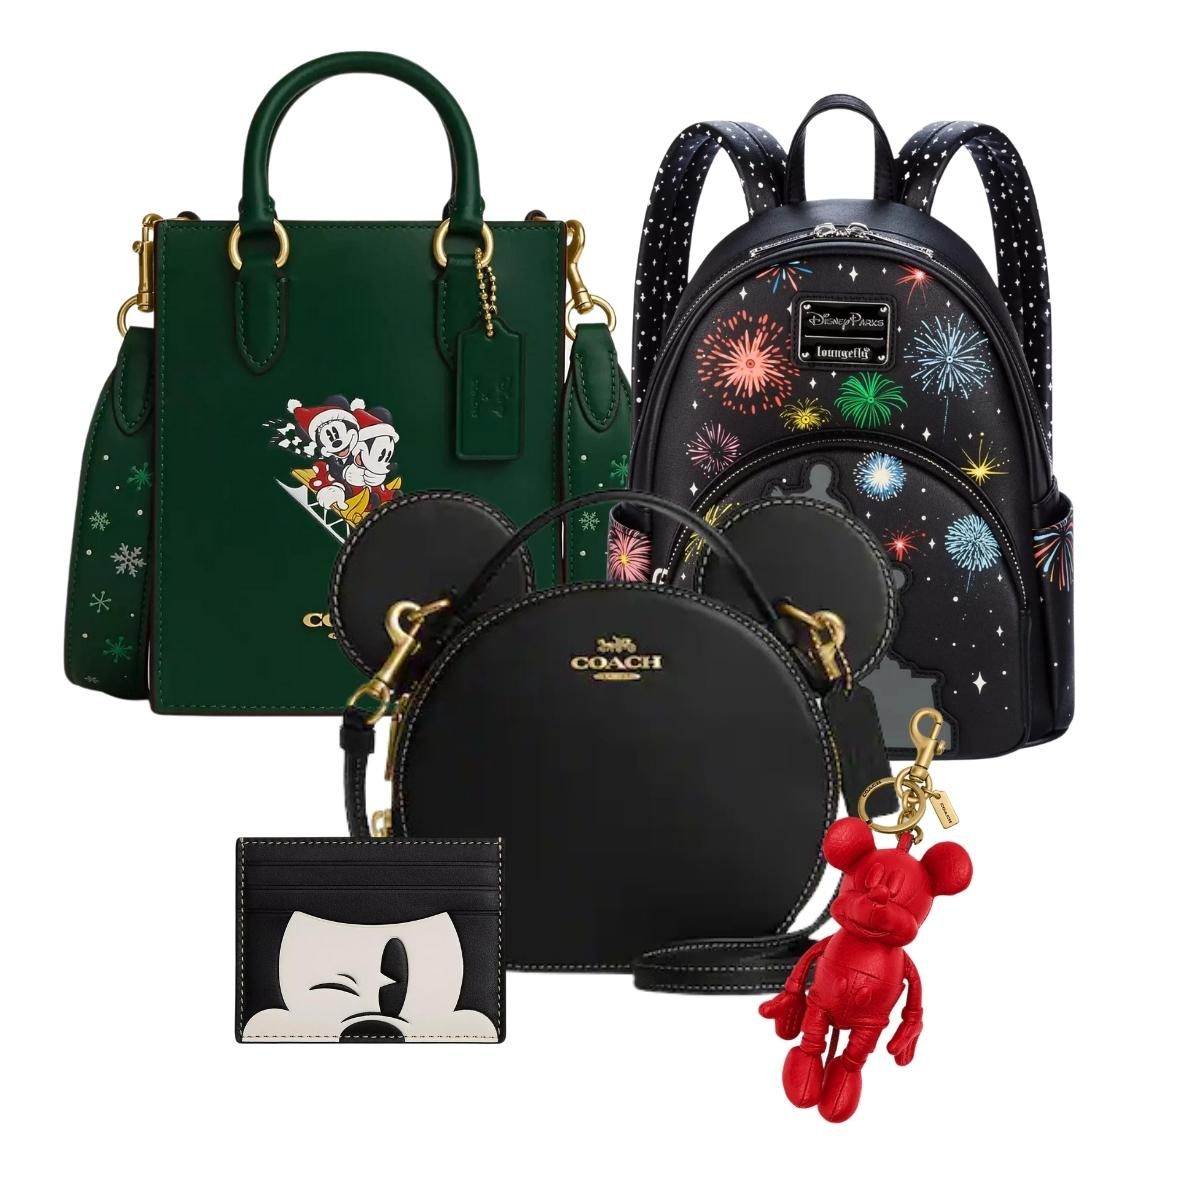 New Sleek Black Mickey Mouse Loungefly Satchel Available at Walt